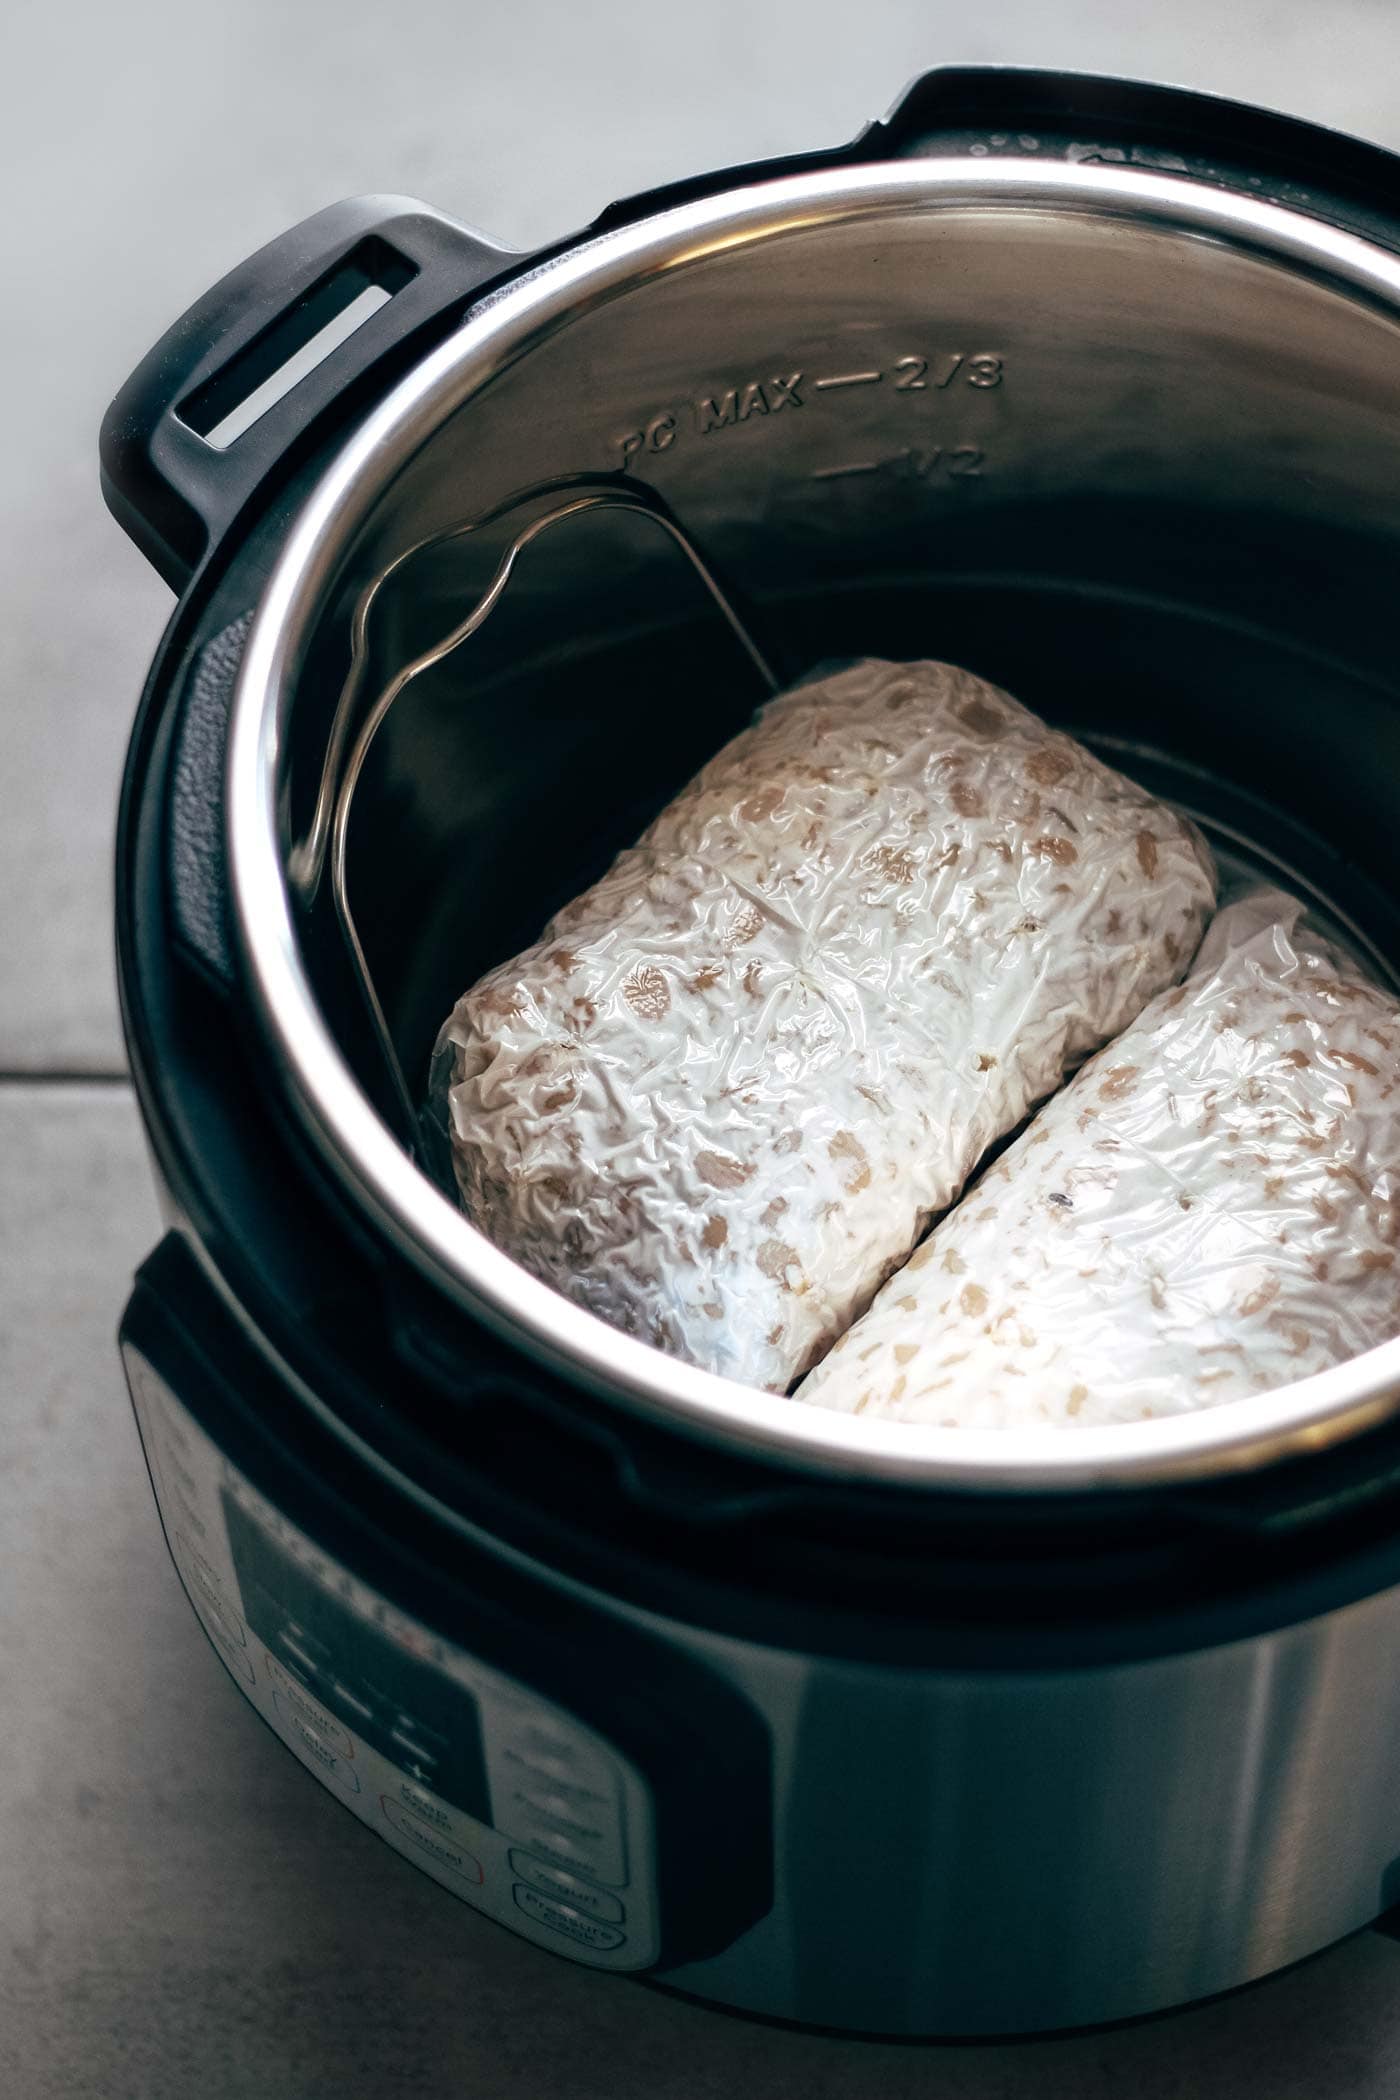 How to Make Tempeh in an Instant Pot